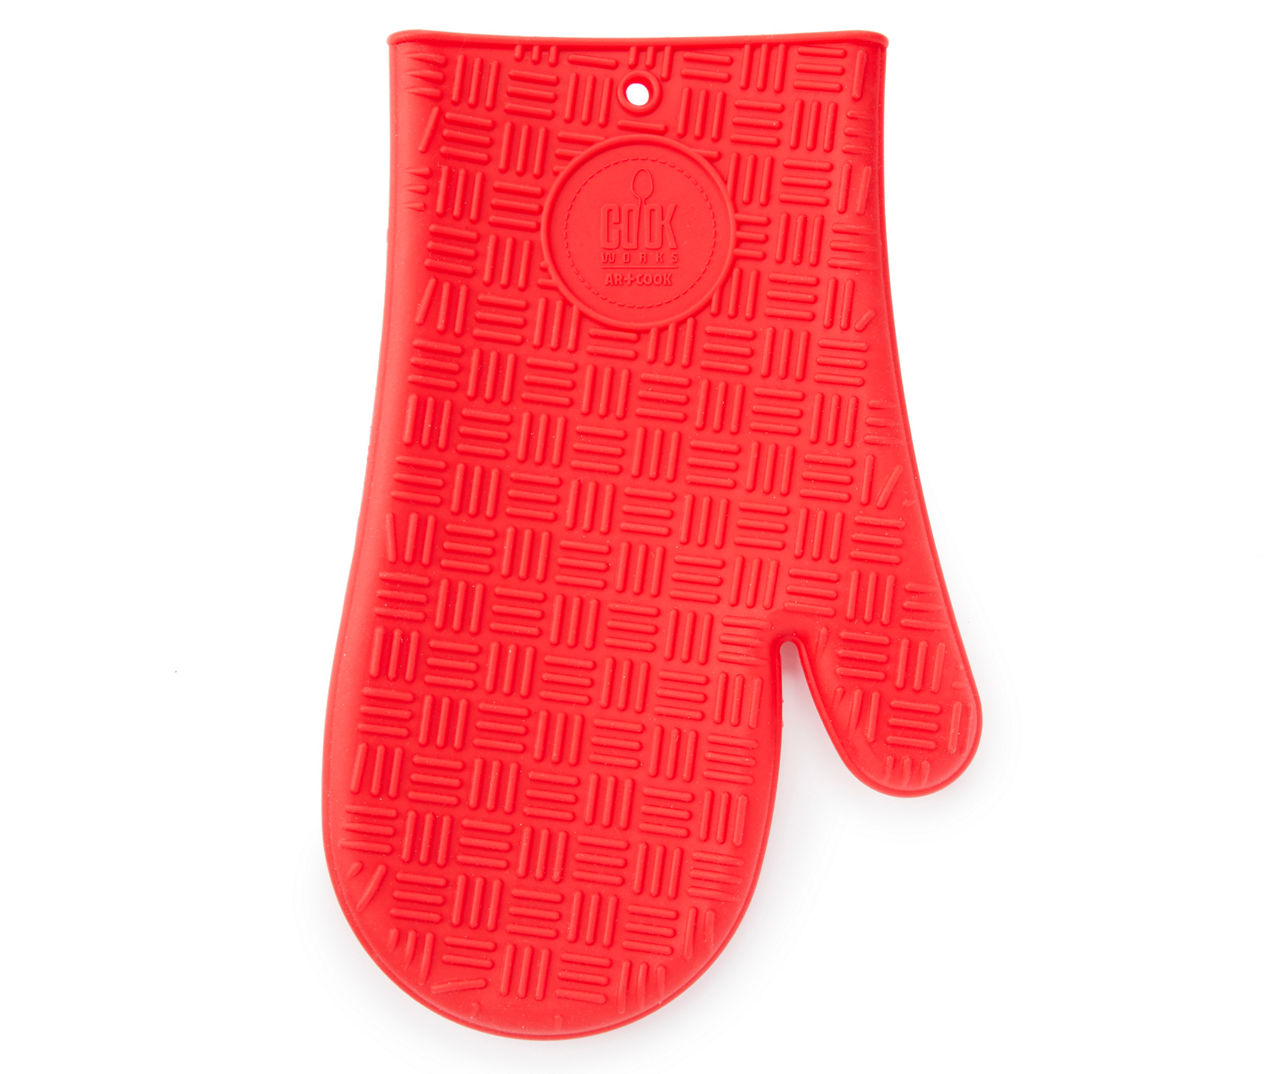 Big Red House Heat-Resistant Oven Mitts - Set of 2 Silicone Kitchen Oven  Mitt Gl